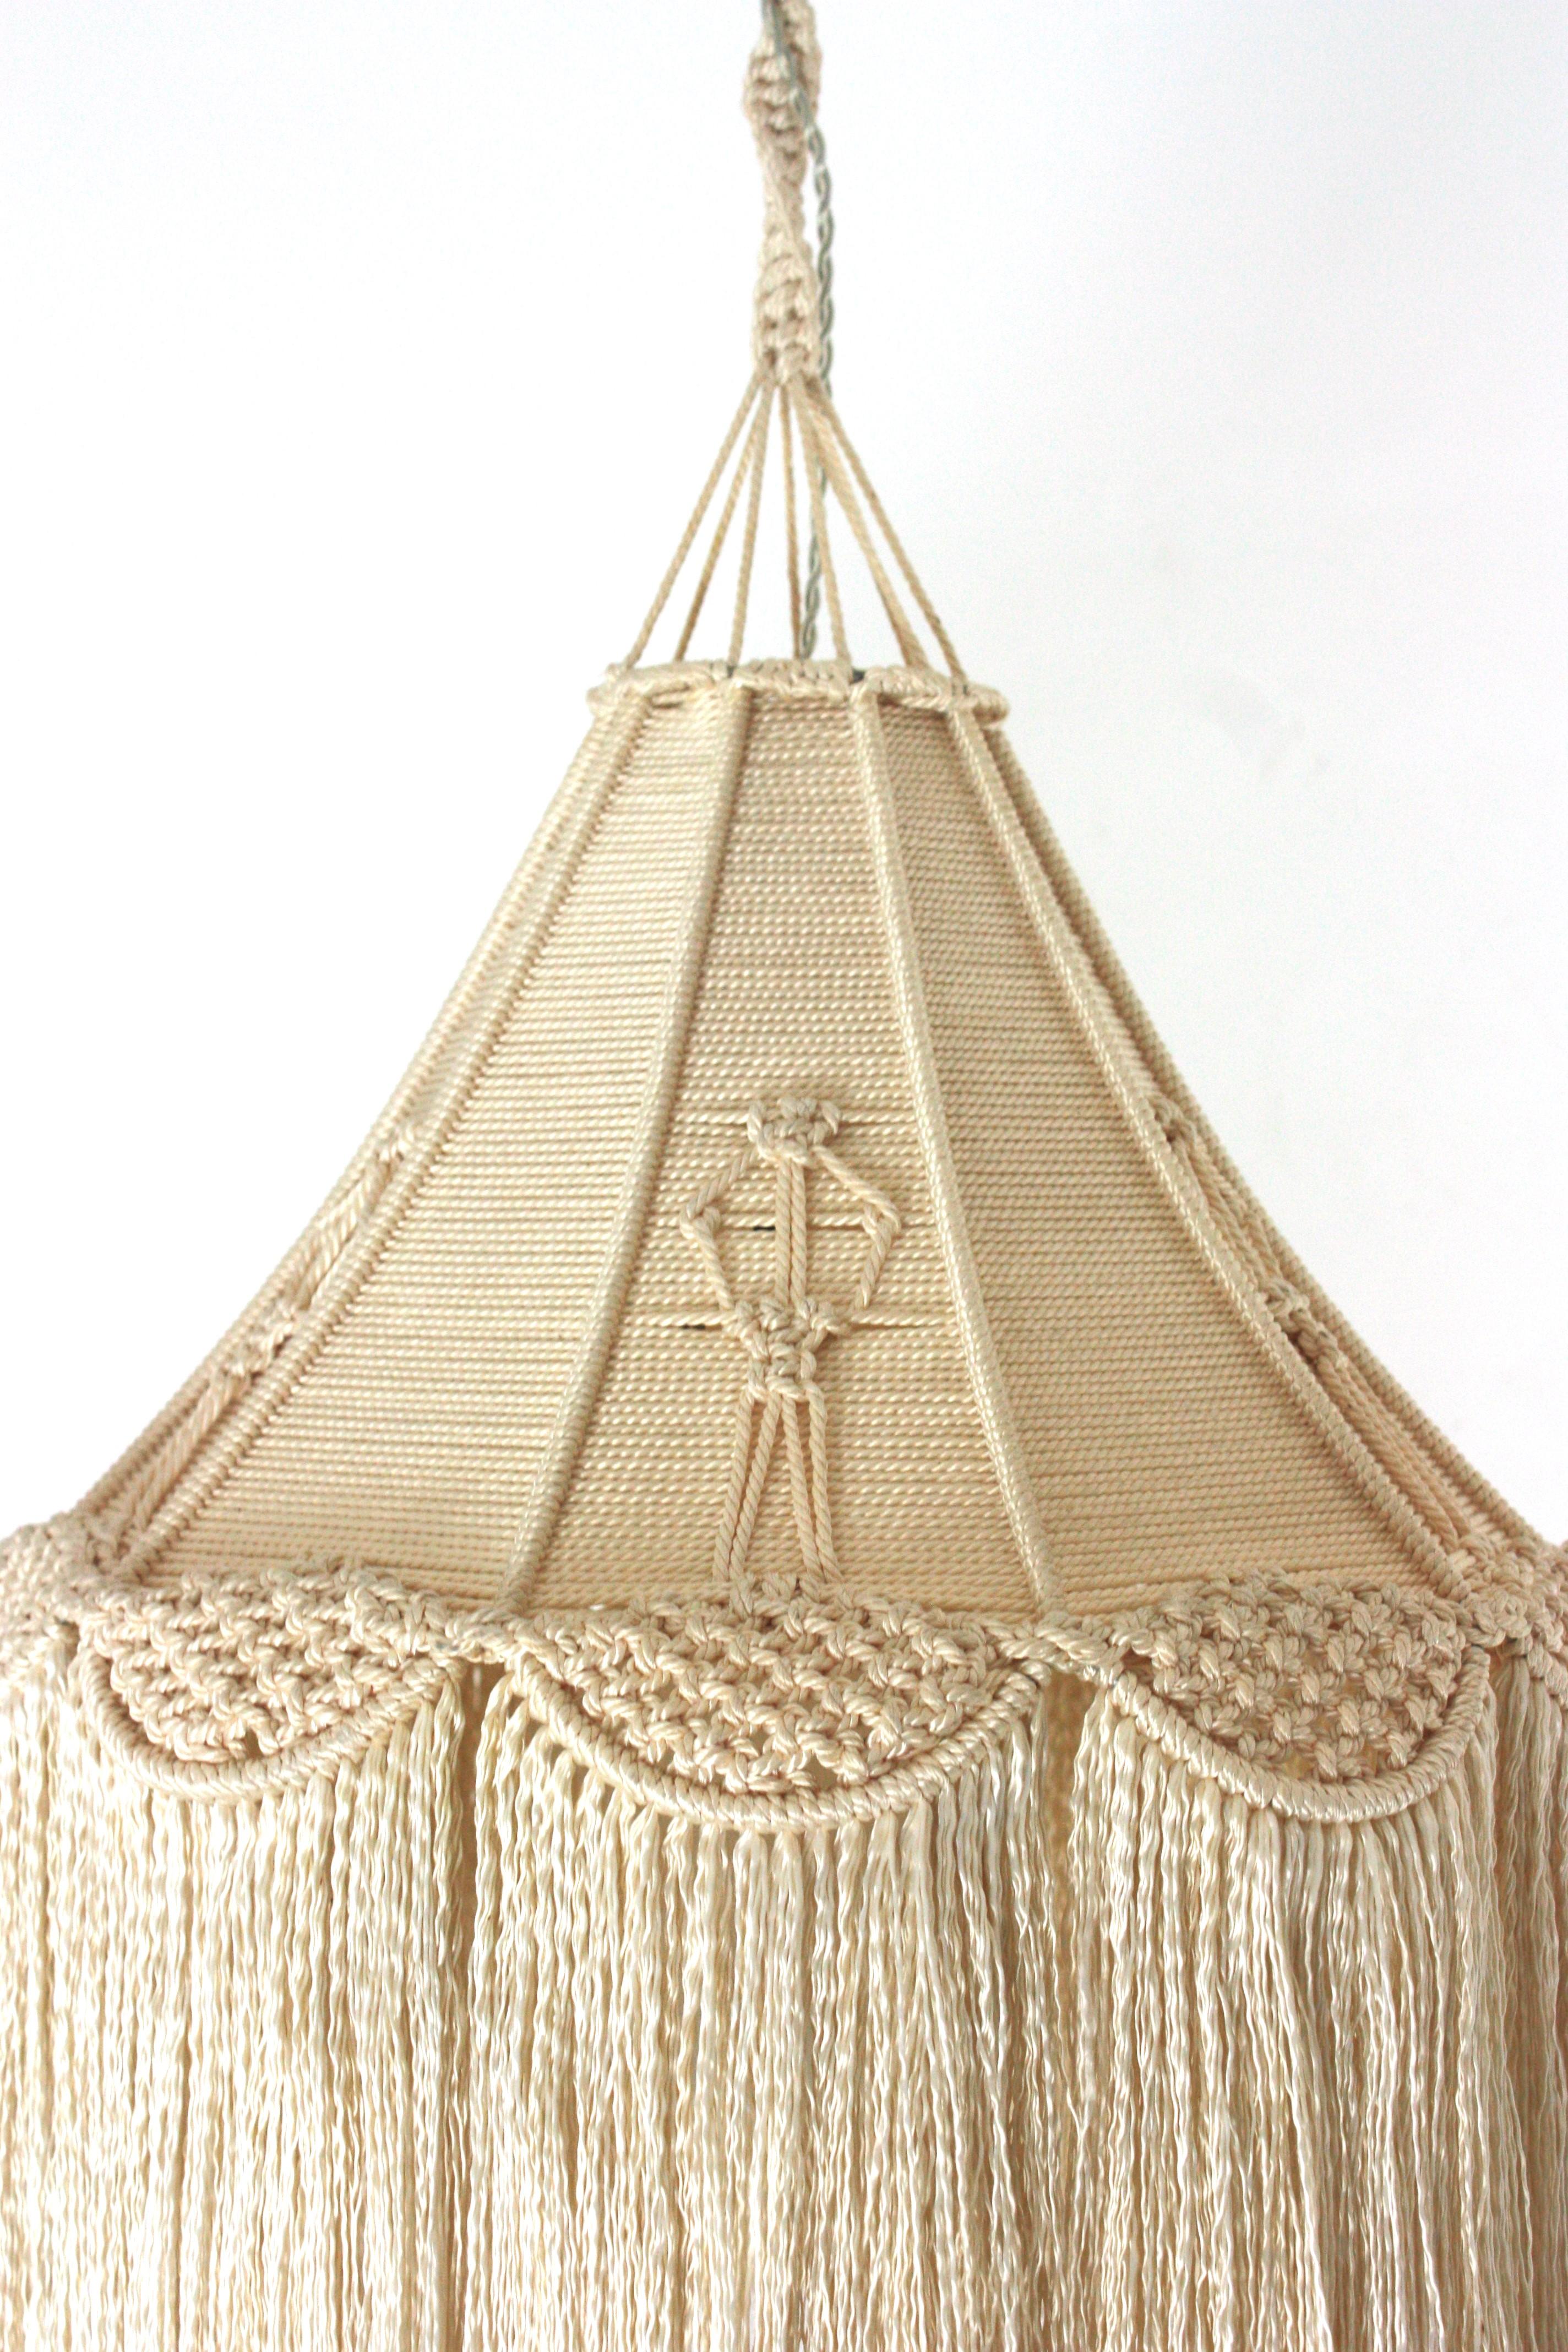 Hand-Crafted Bohemian Macrame Fiber Pendant Ceiling Hanging Lamp with Fringe For Sale